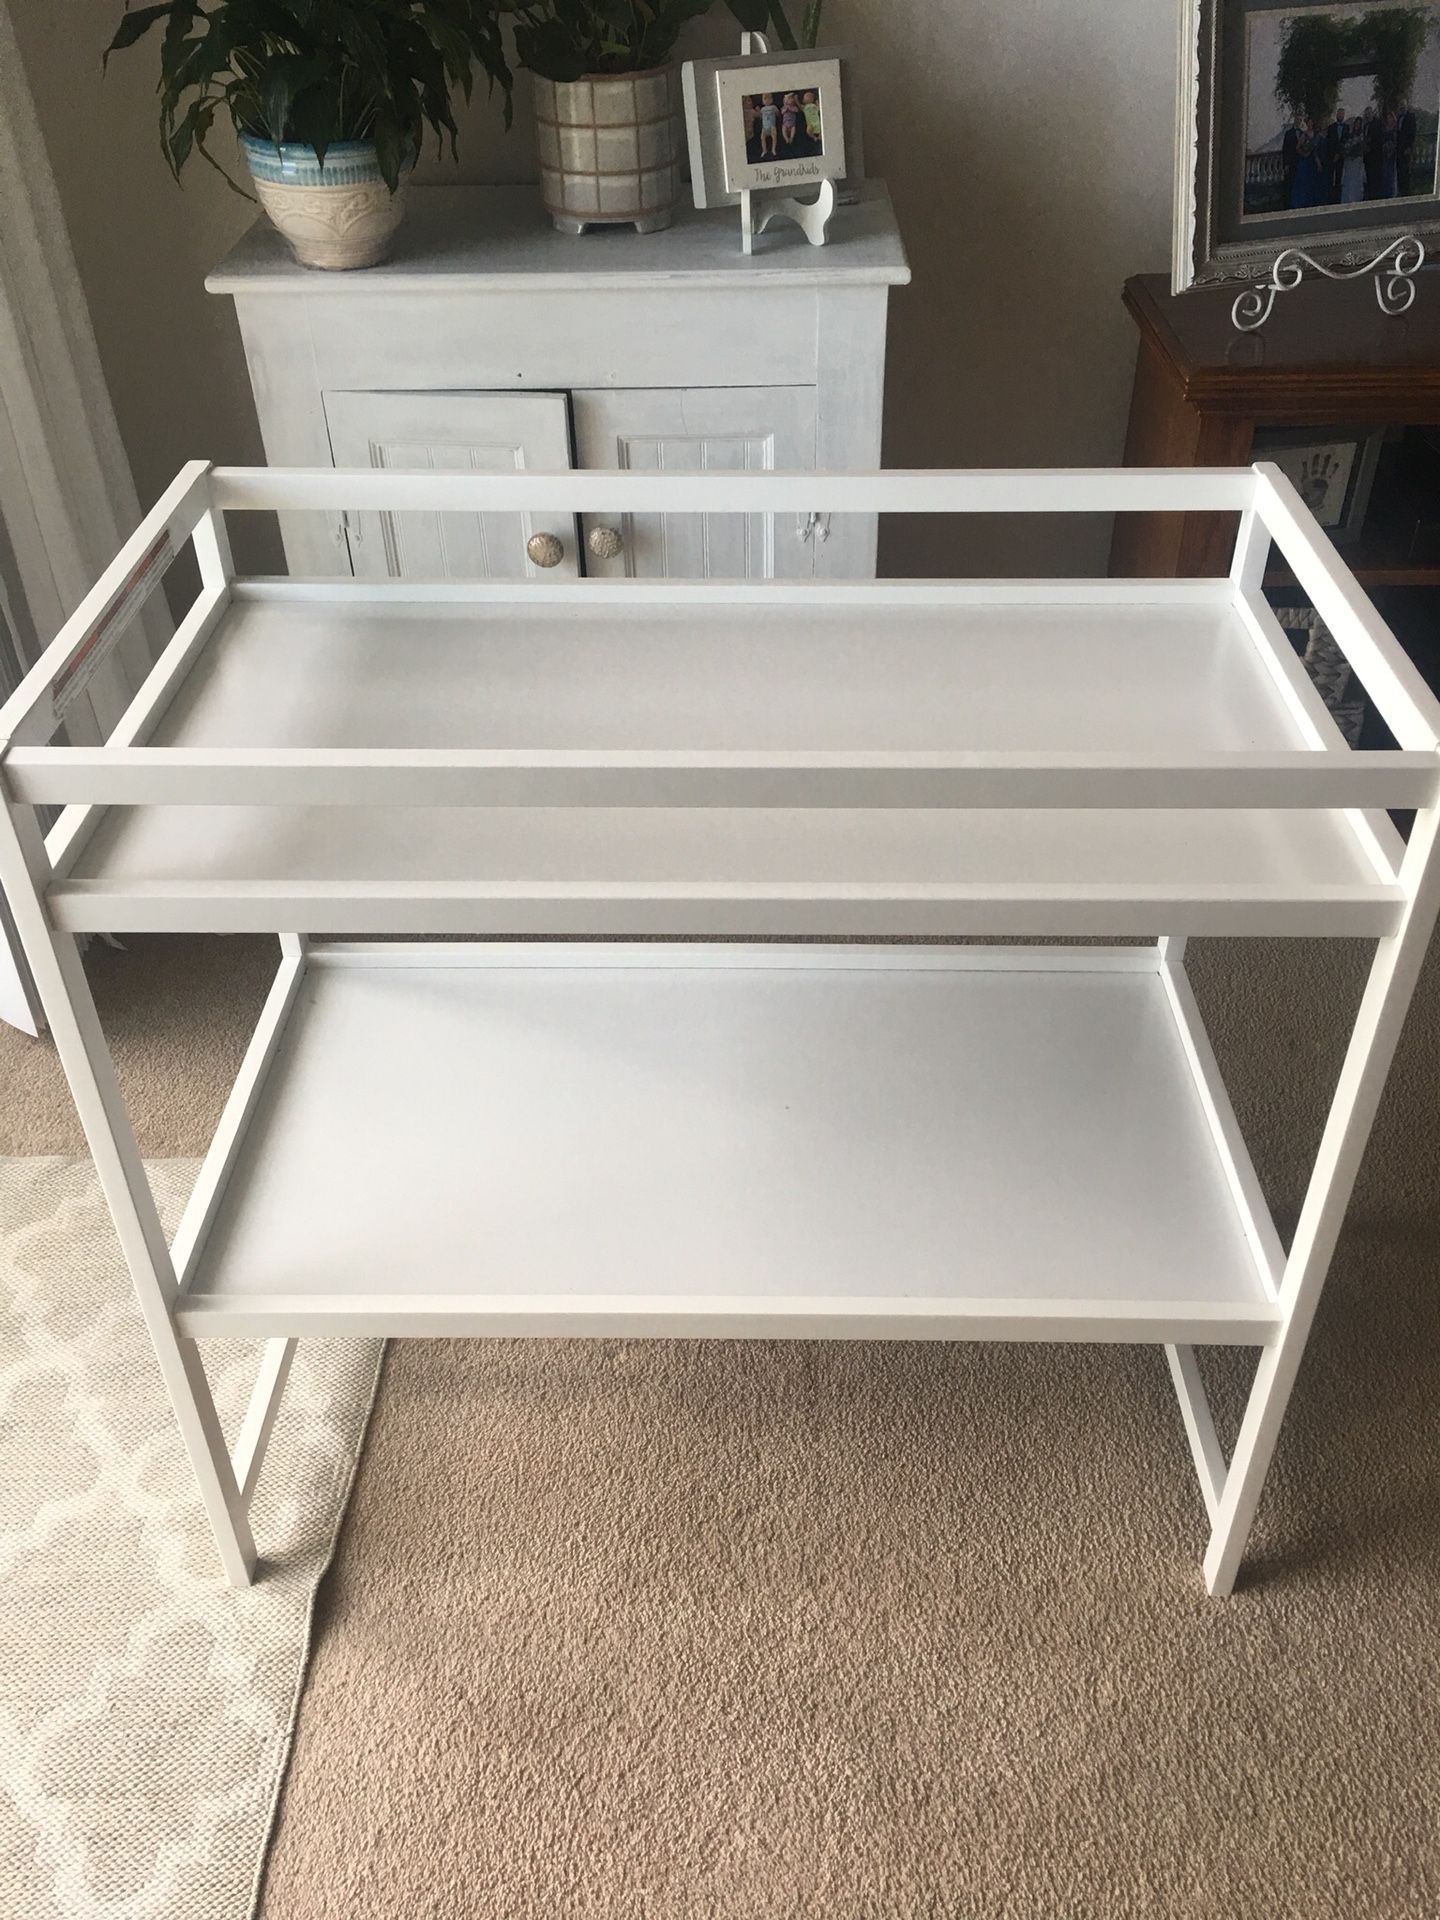 Changing table brand new